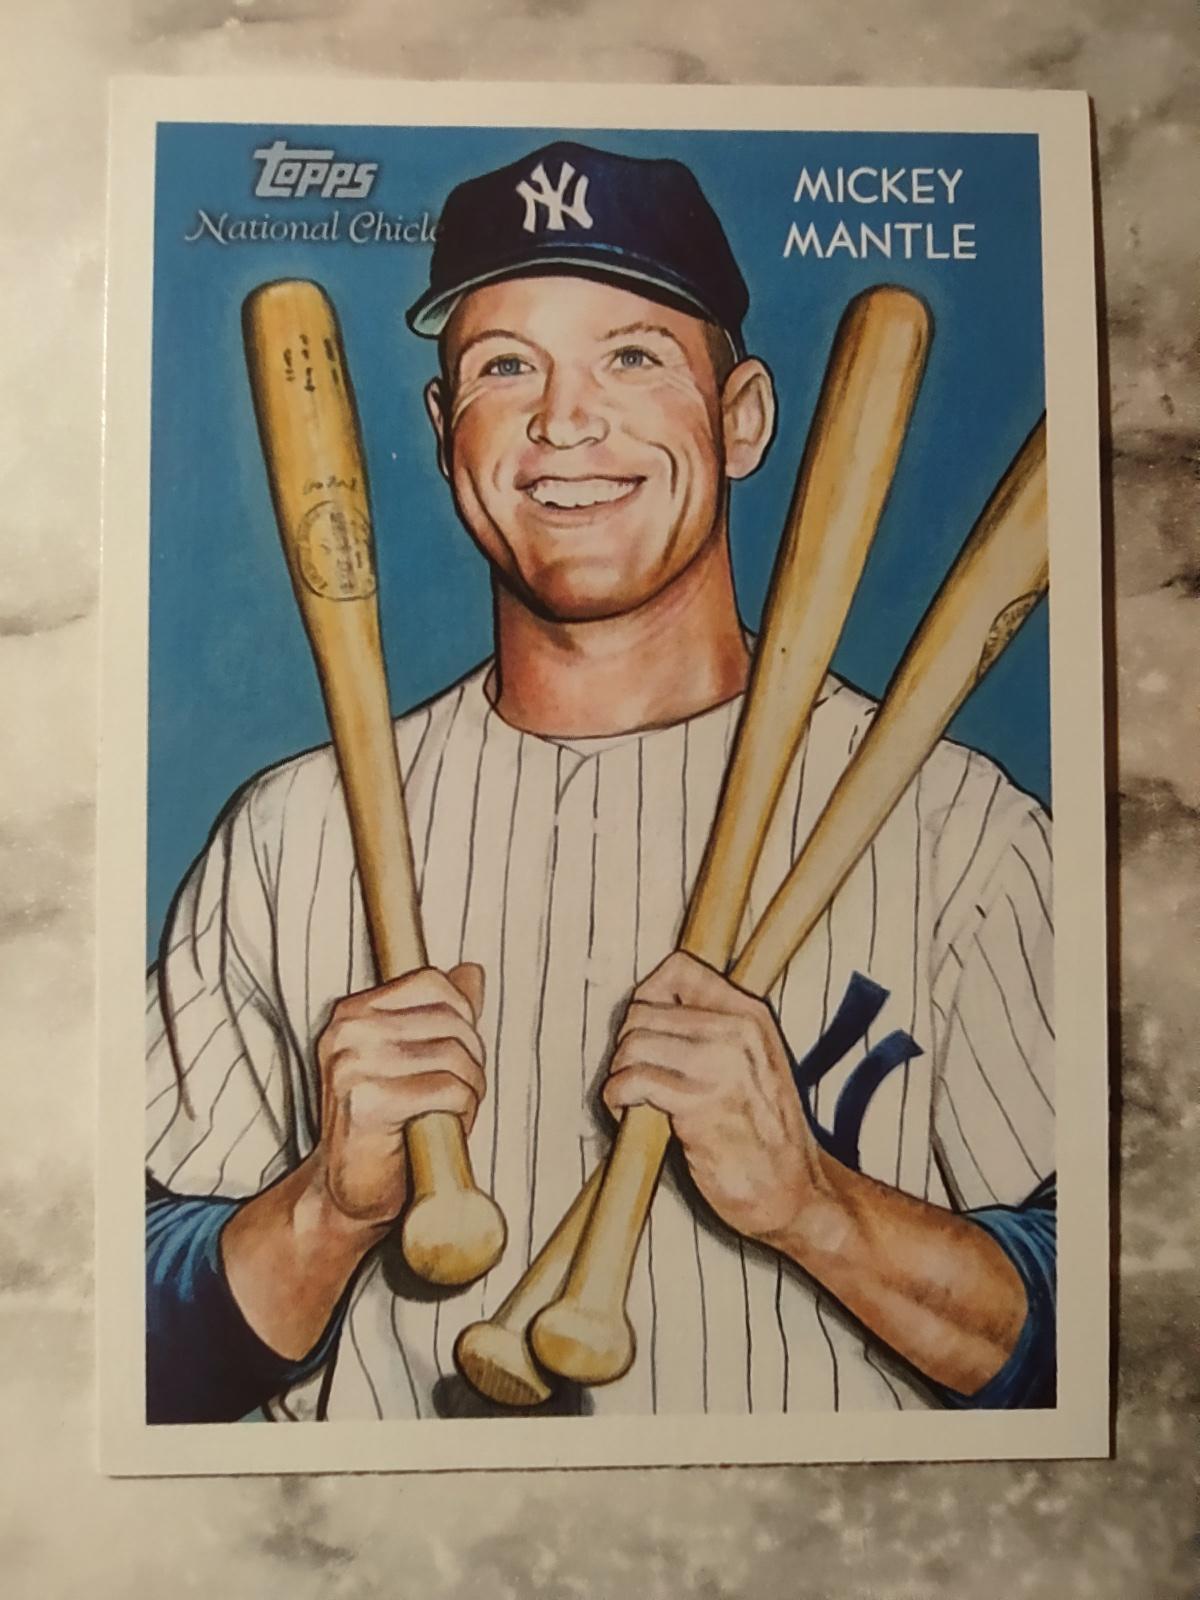 2010 Topps National Circle Mickey Mantle #242